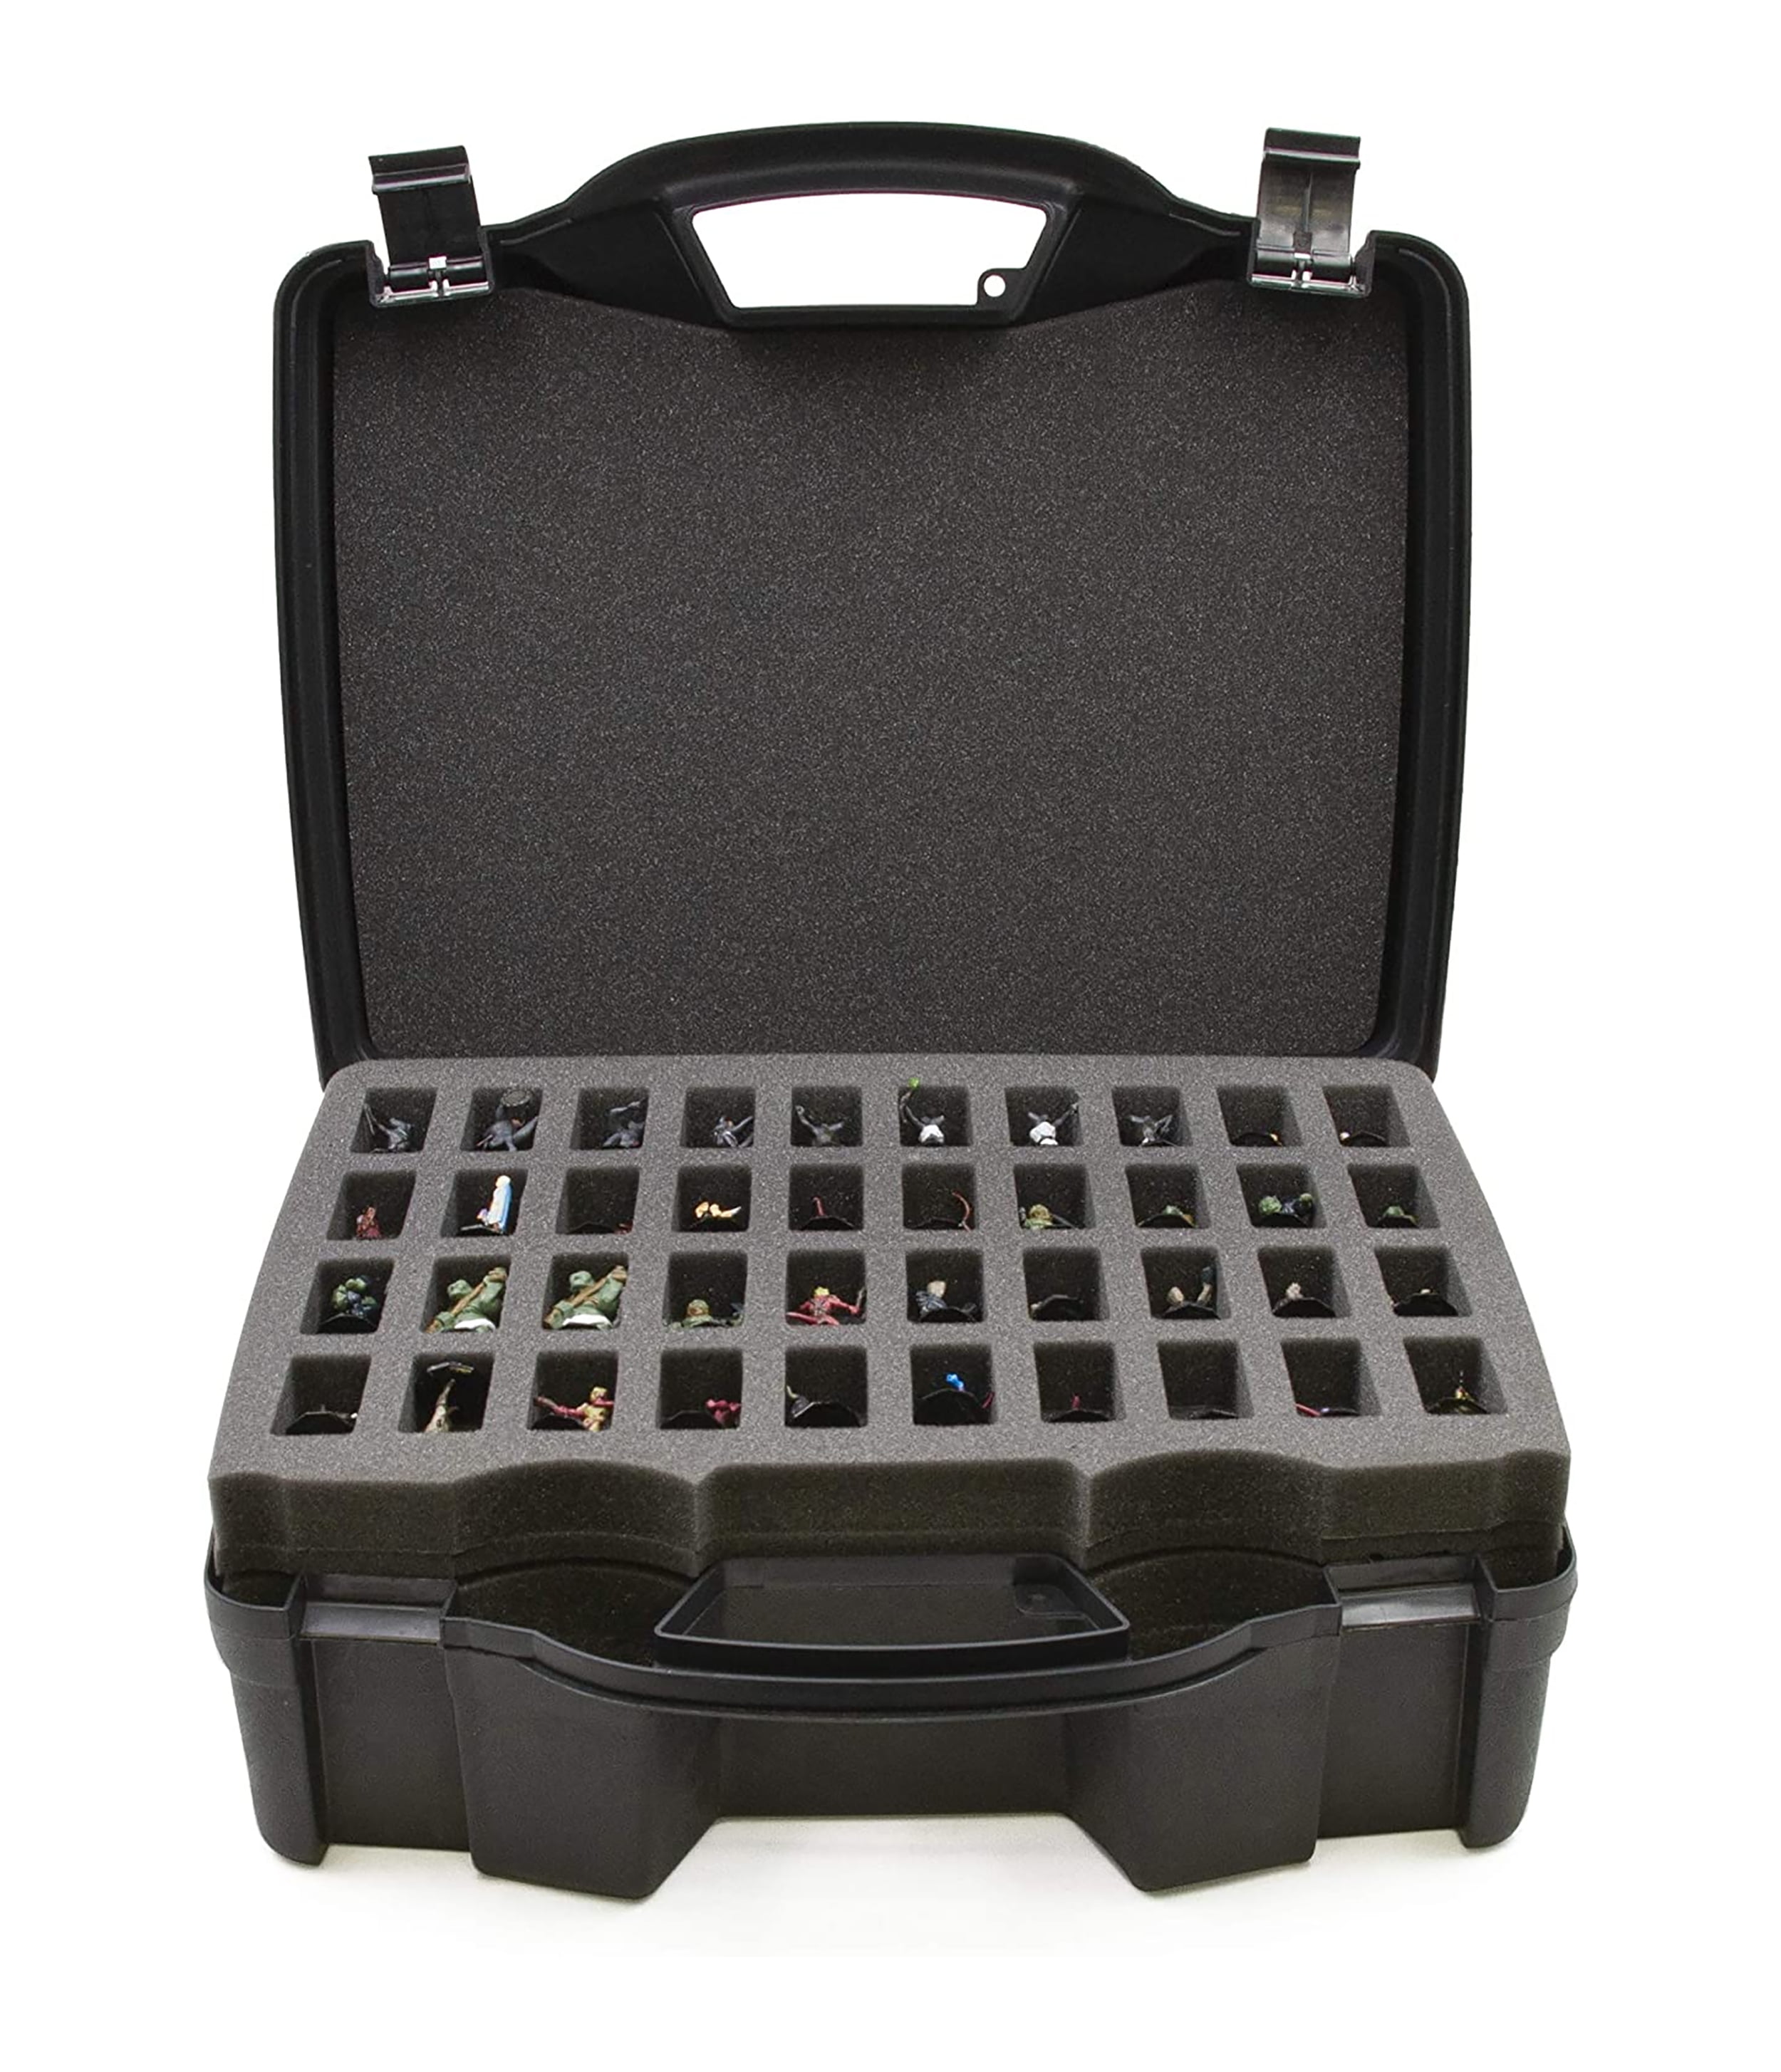 CM 14 Miniature Storage Locking Box with 2 Foams - Carrying Case for  Miniatures